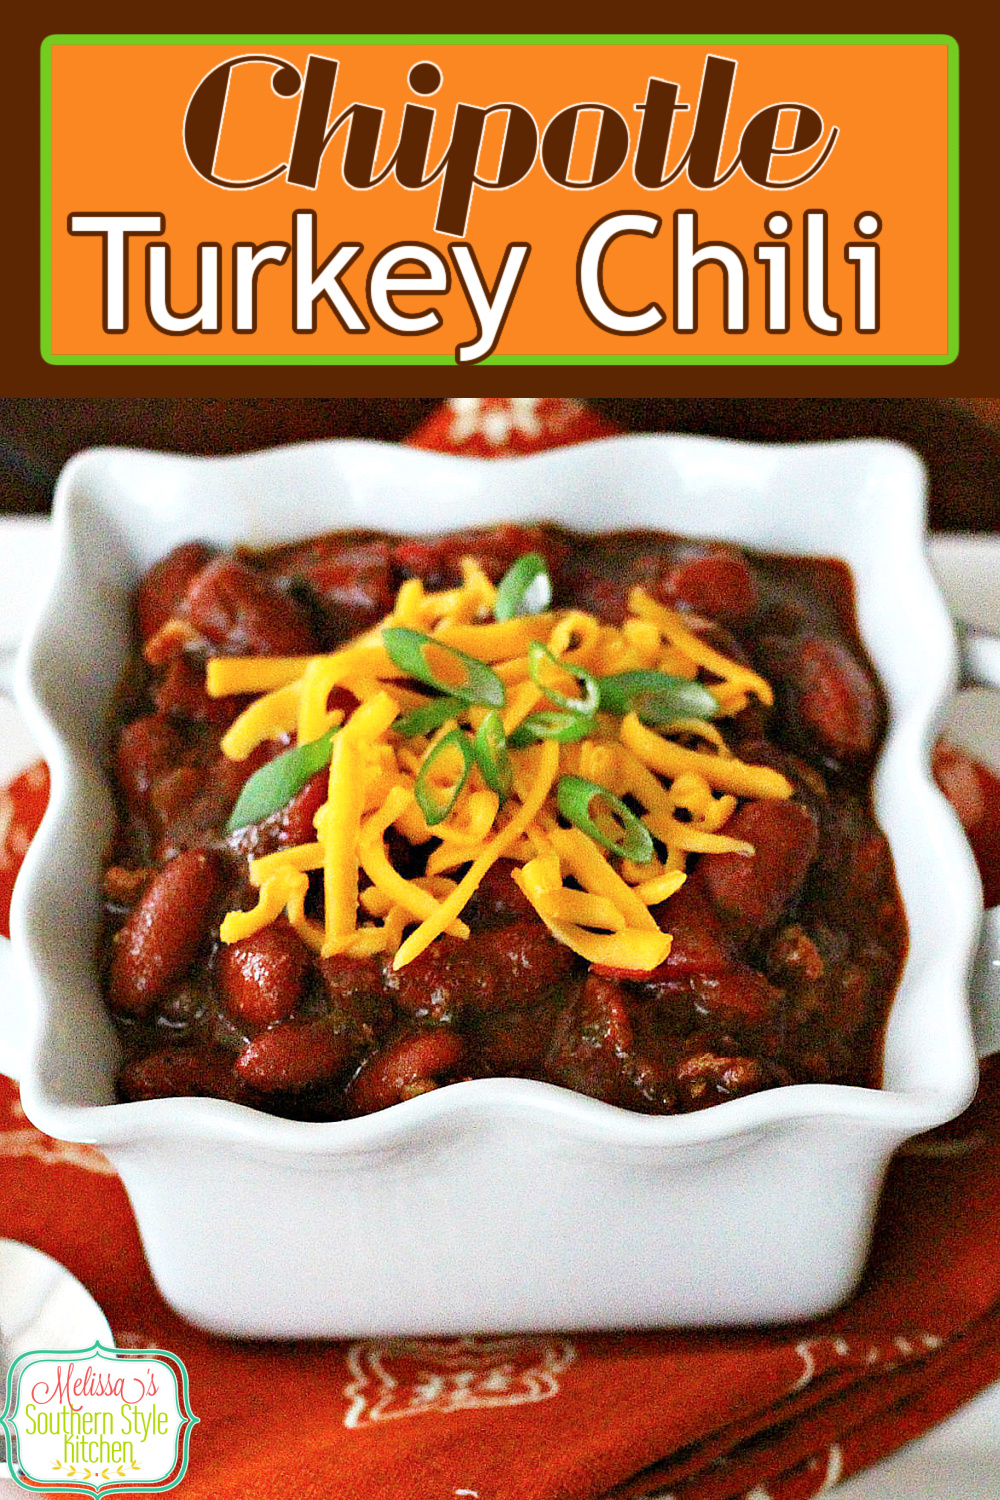 Top with your favorite chili fixins' and this Best Chipotle Turkey Chili recipe is sure to bring the heat to meal time #turkey chili #turkeyrecipes #groundturkeyrecipes #bestchilirecipes #turkey #healthychili #southernrecipes #dinner #dinnerideas via @melissasssk